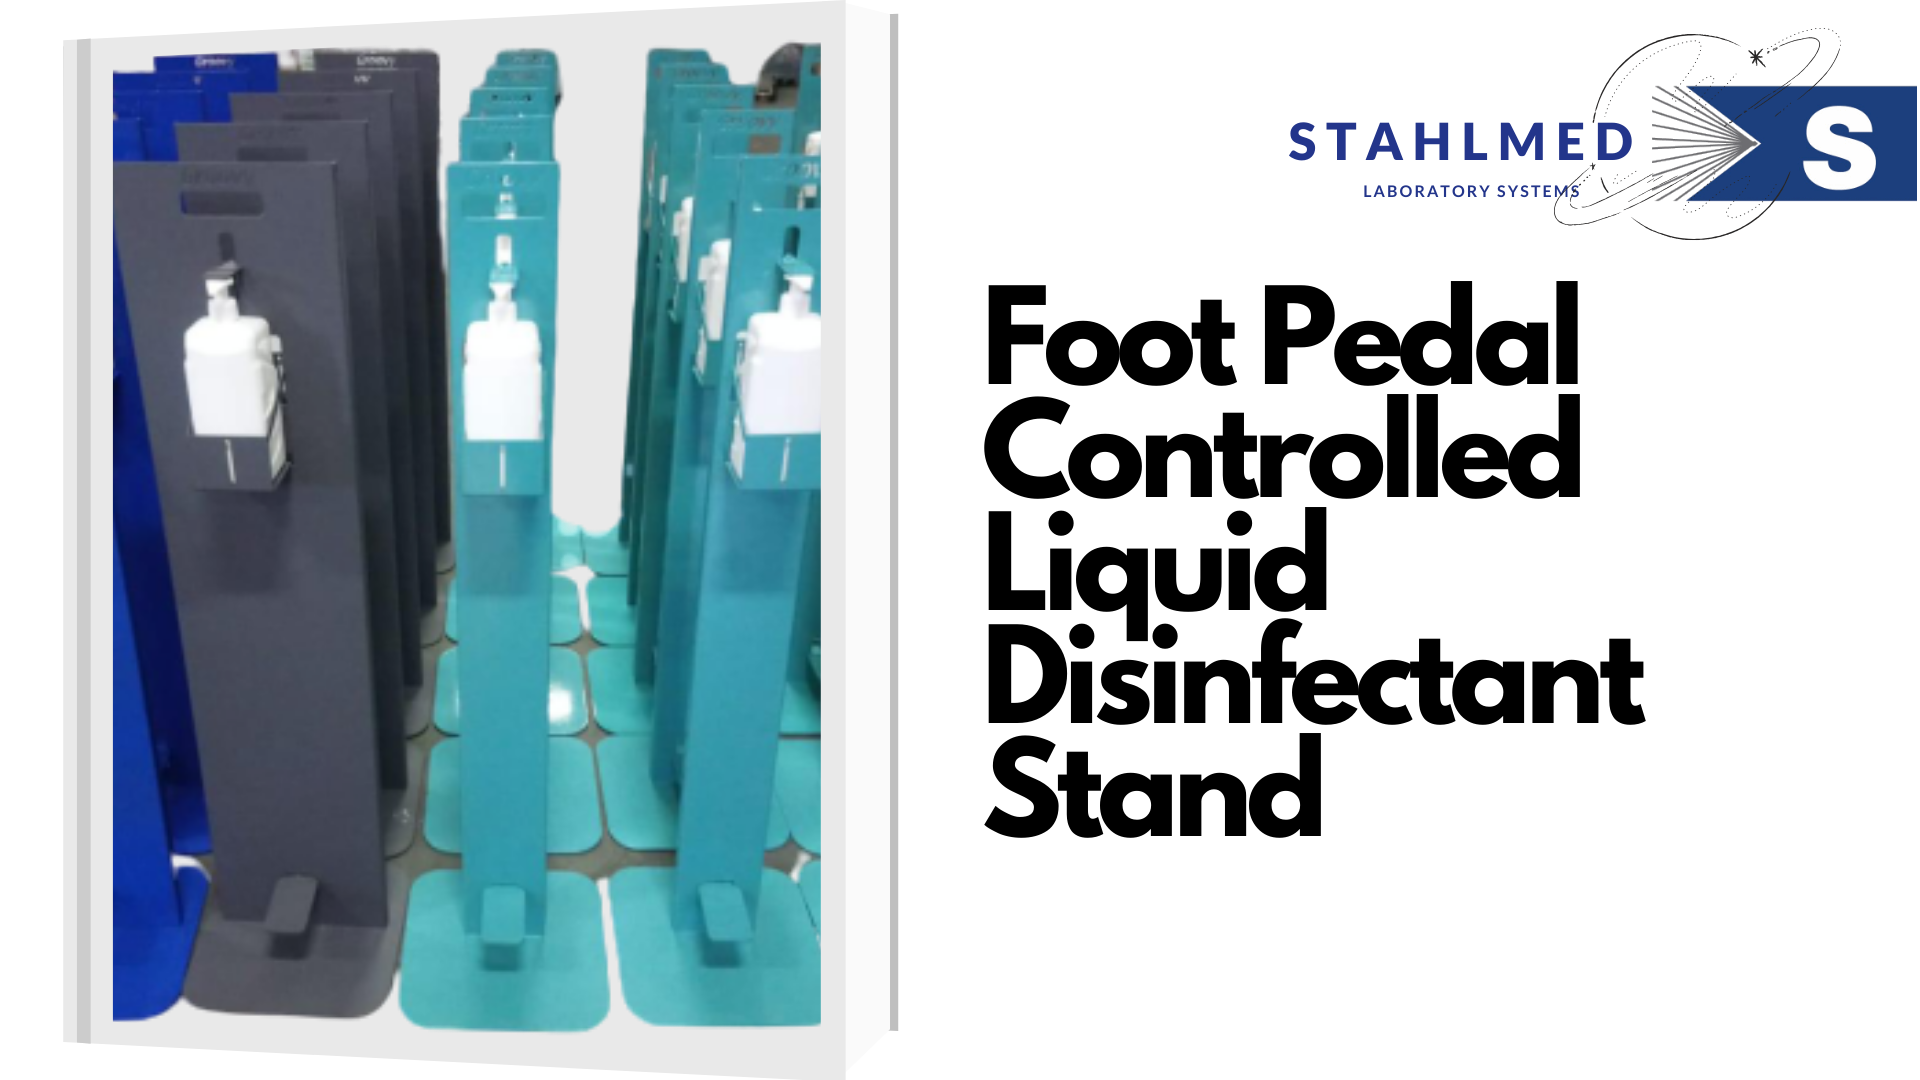 Foot Pedal Controlled Disinfectand Stand